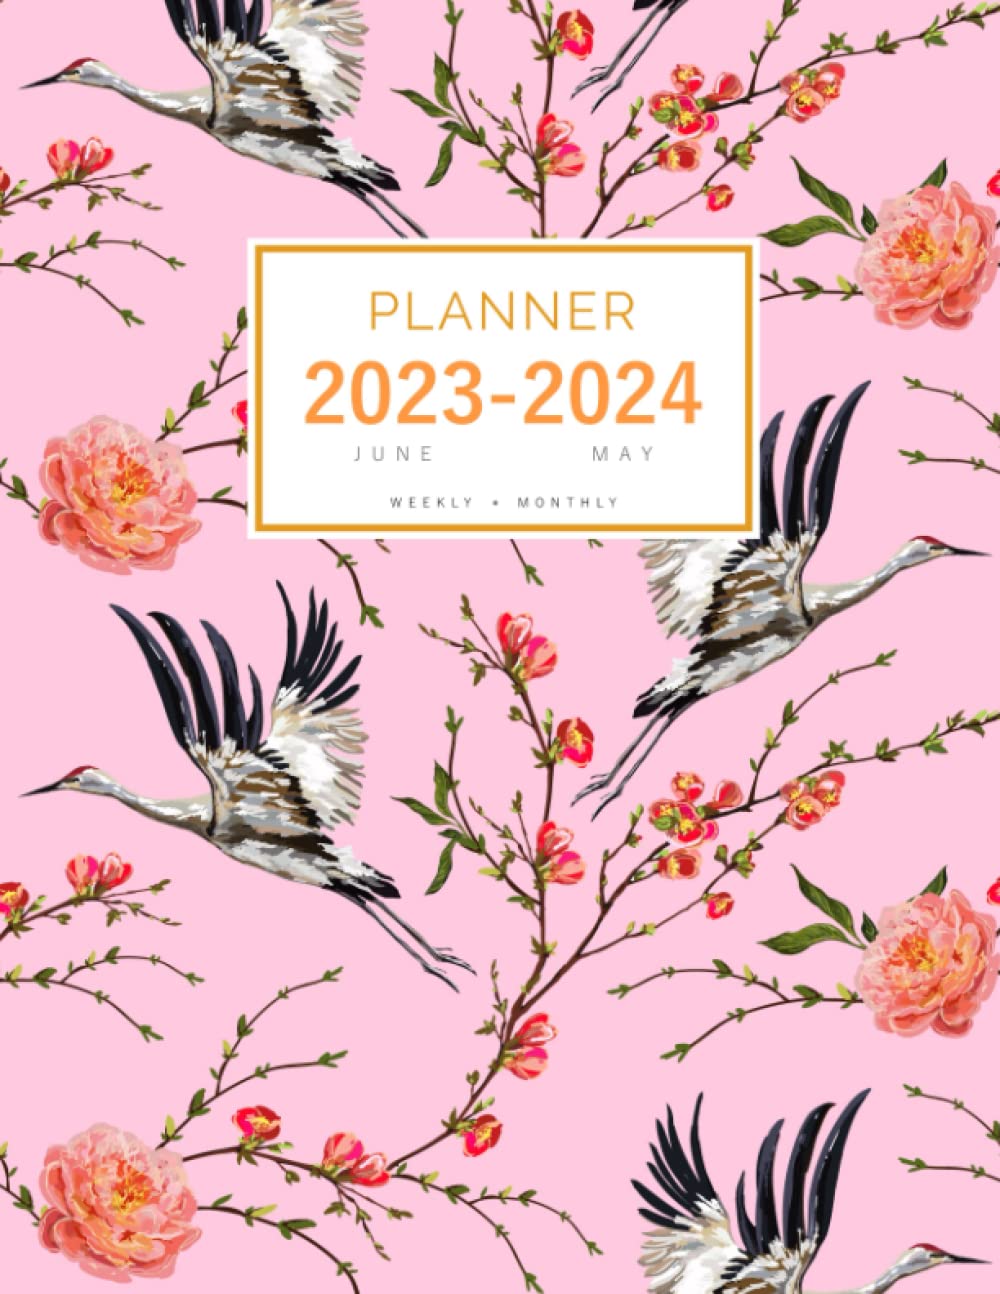 Planner 2023-2024: 8.5 x 11 Weekly and Monthly Organizer from June 2023 to May 2024 | Traditional Japanese Bird Flower Design Pink